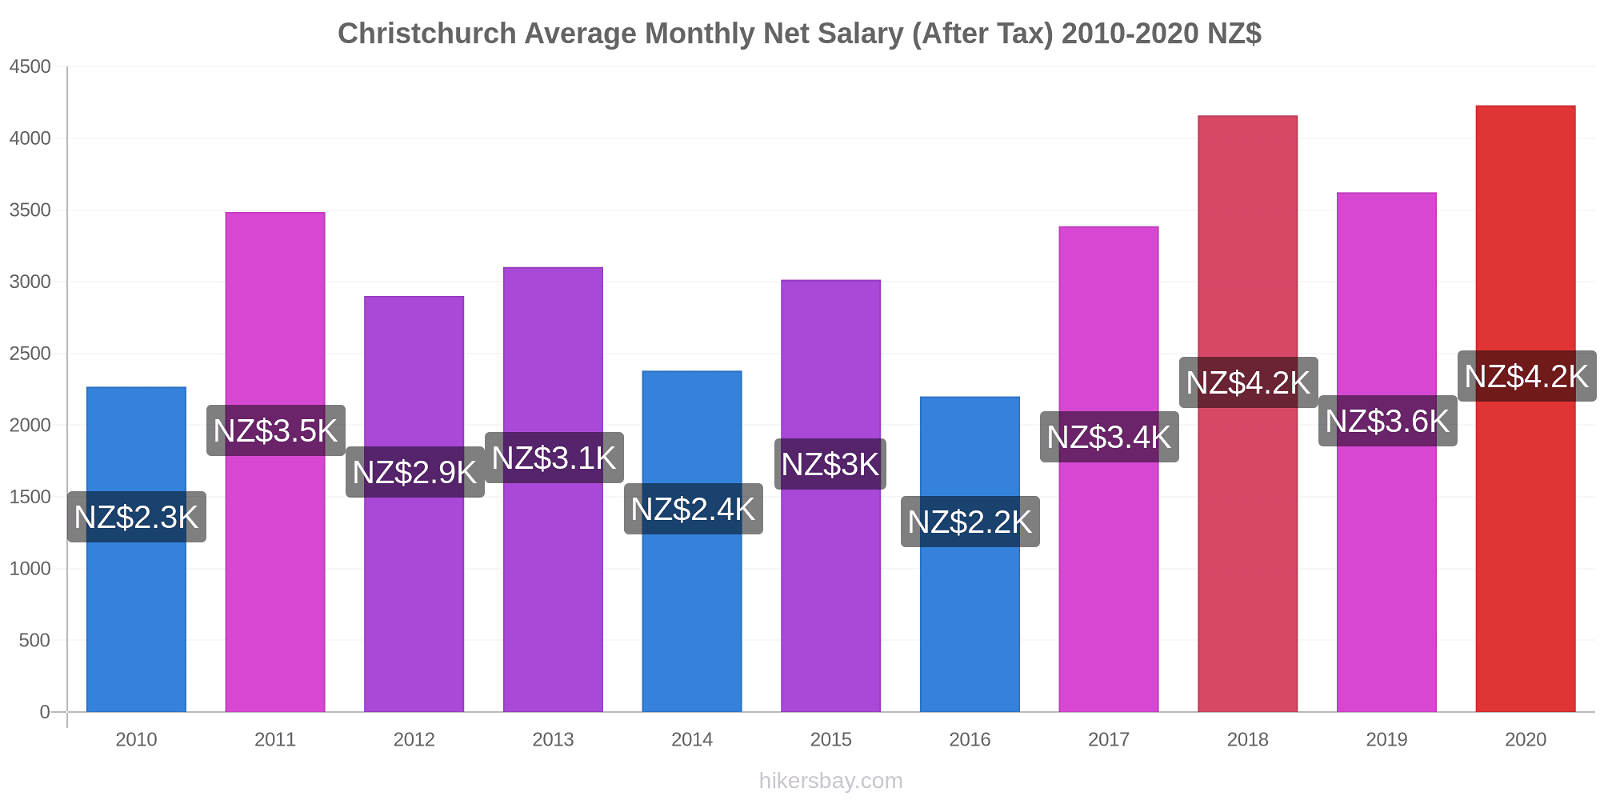 Christchurch price changes Average Monthly Net Salary (After Tax) hikersbay.com